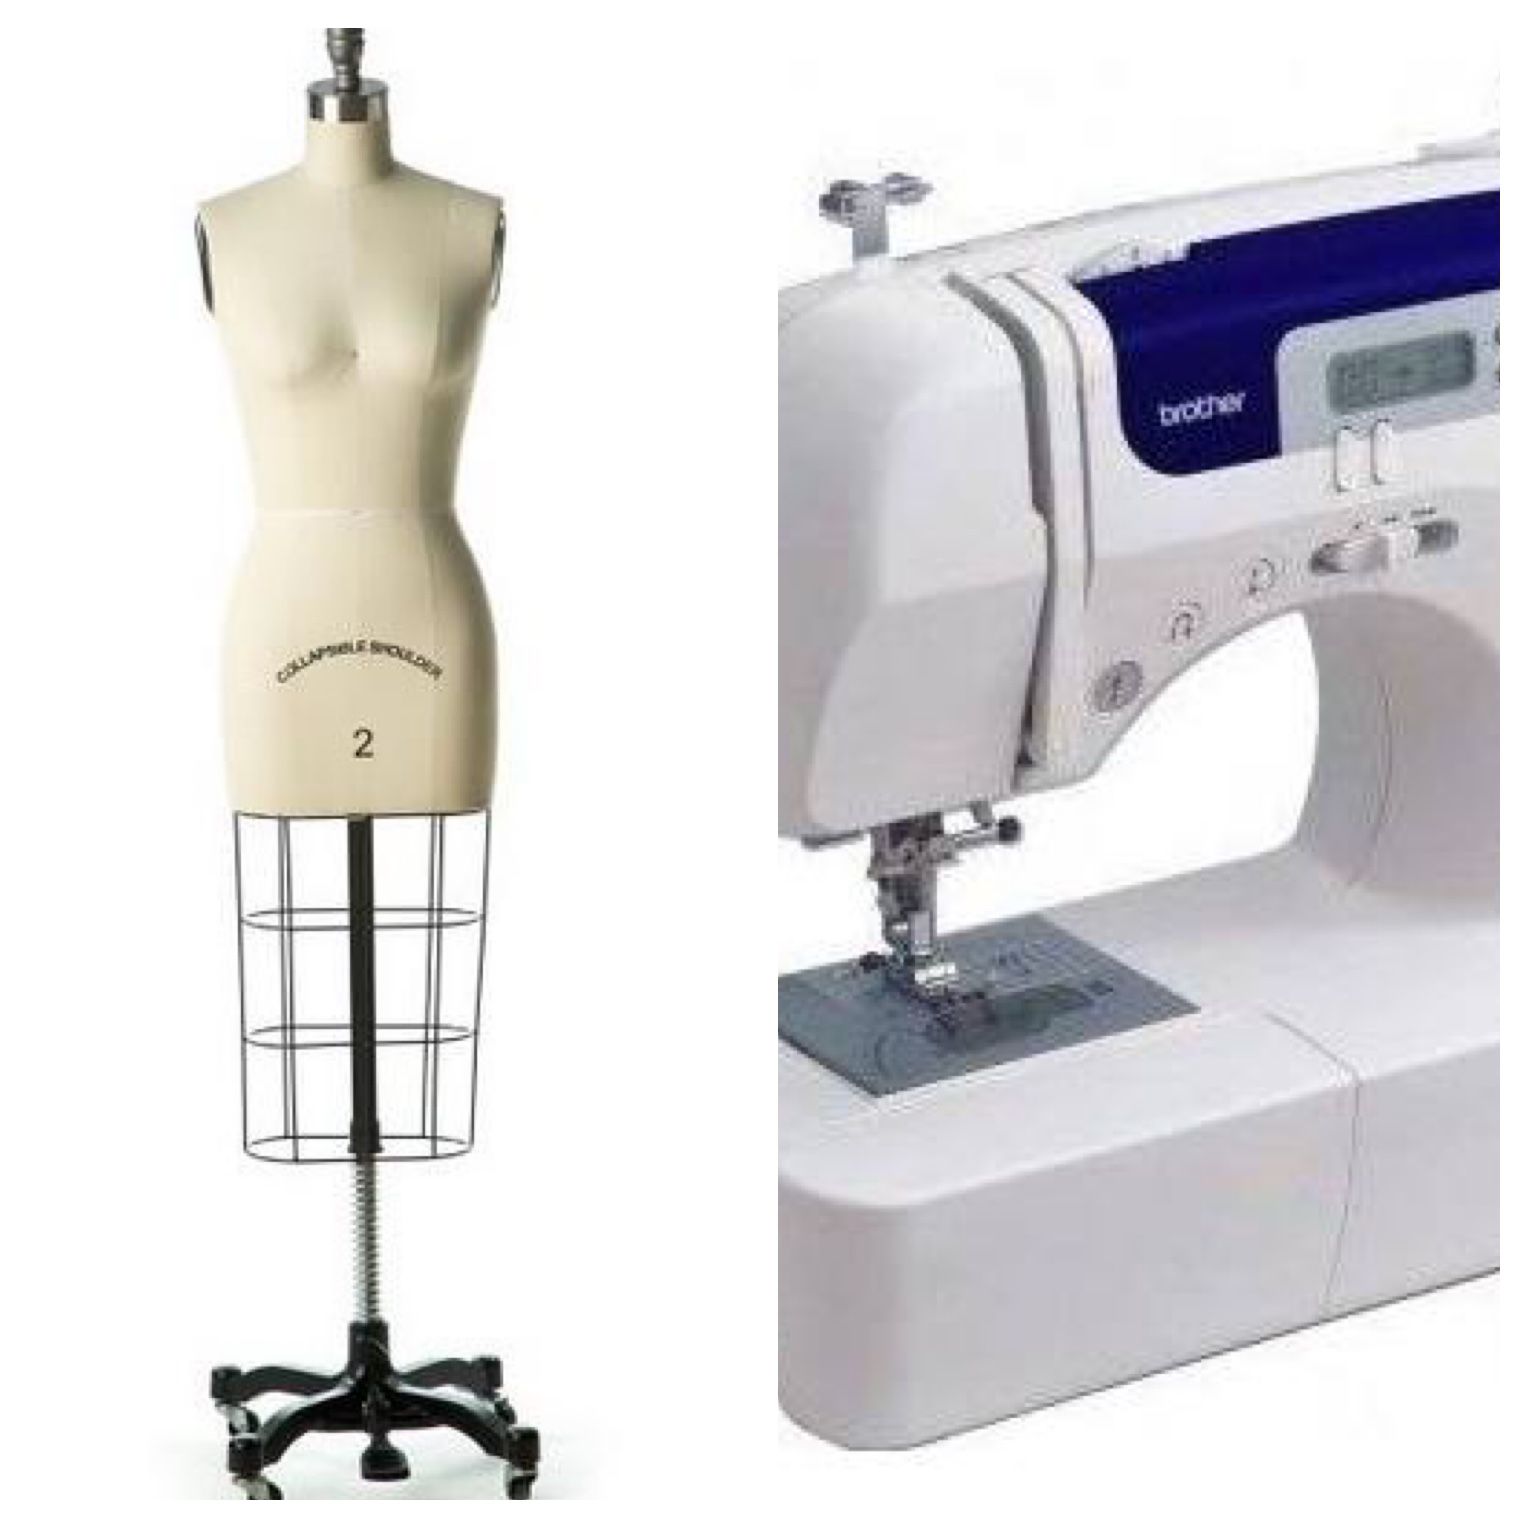 Dress form and sewing machine